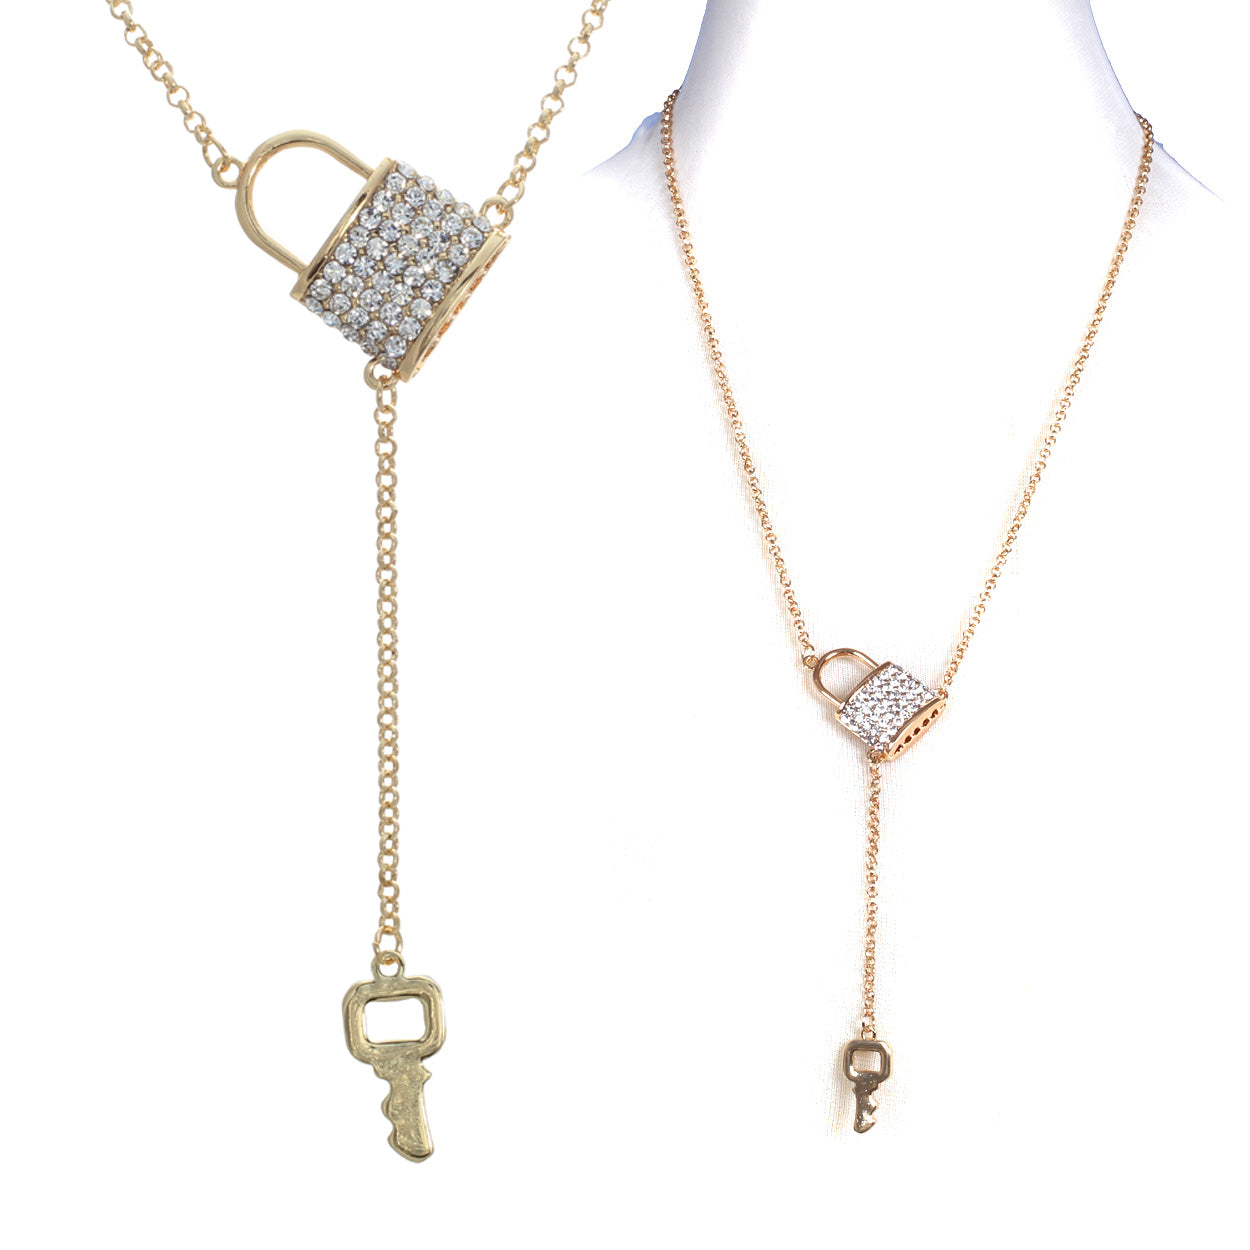 Key and Lock Y Necklace #12-15117GD